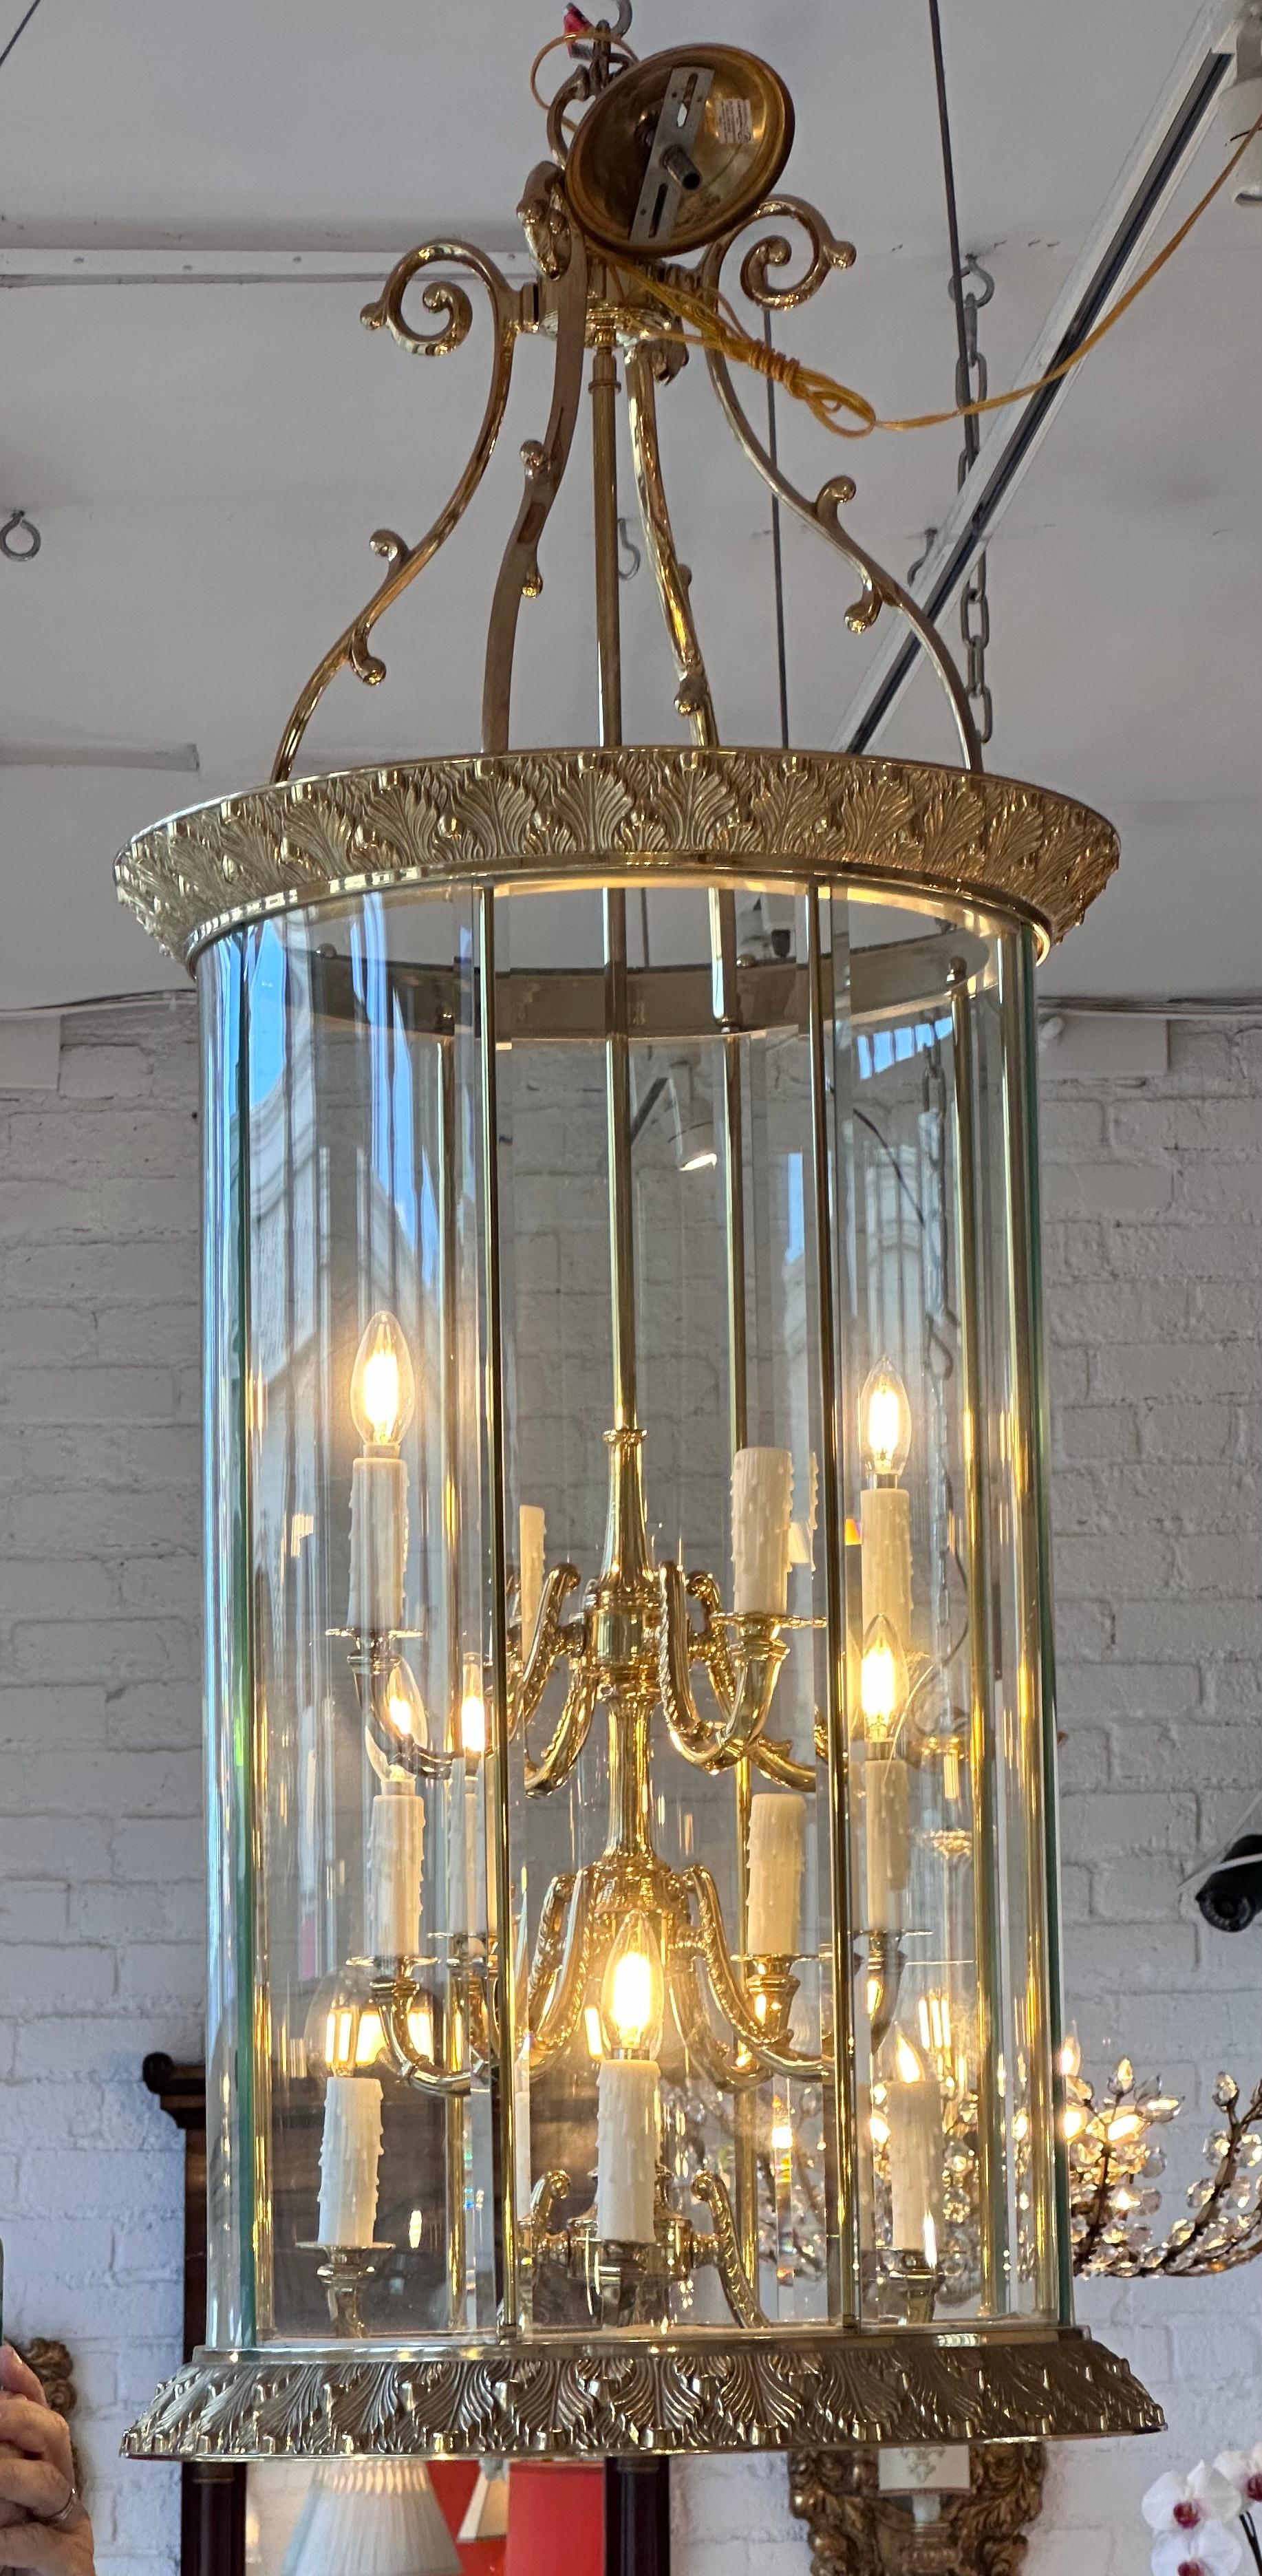 Art Deco Bronze Chandelier Theater Lantern Light Fixture  

Additional information:
Materials: brass, glass
Color: brass
Period: 1930’s
Styles: Art Deco
Power Sources: Up to 120V (US Standard), hardwired
Item Type: Vintage, Antique or